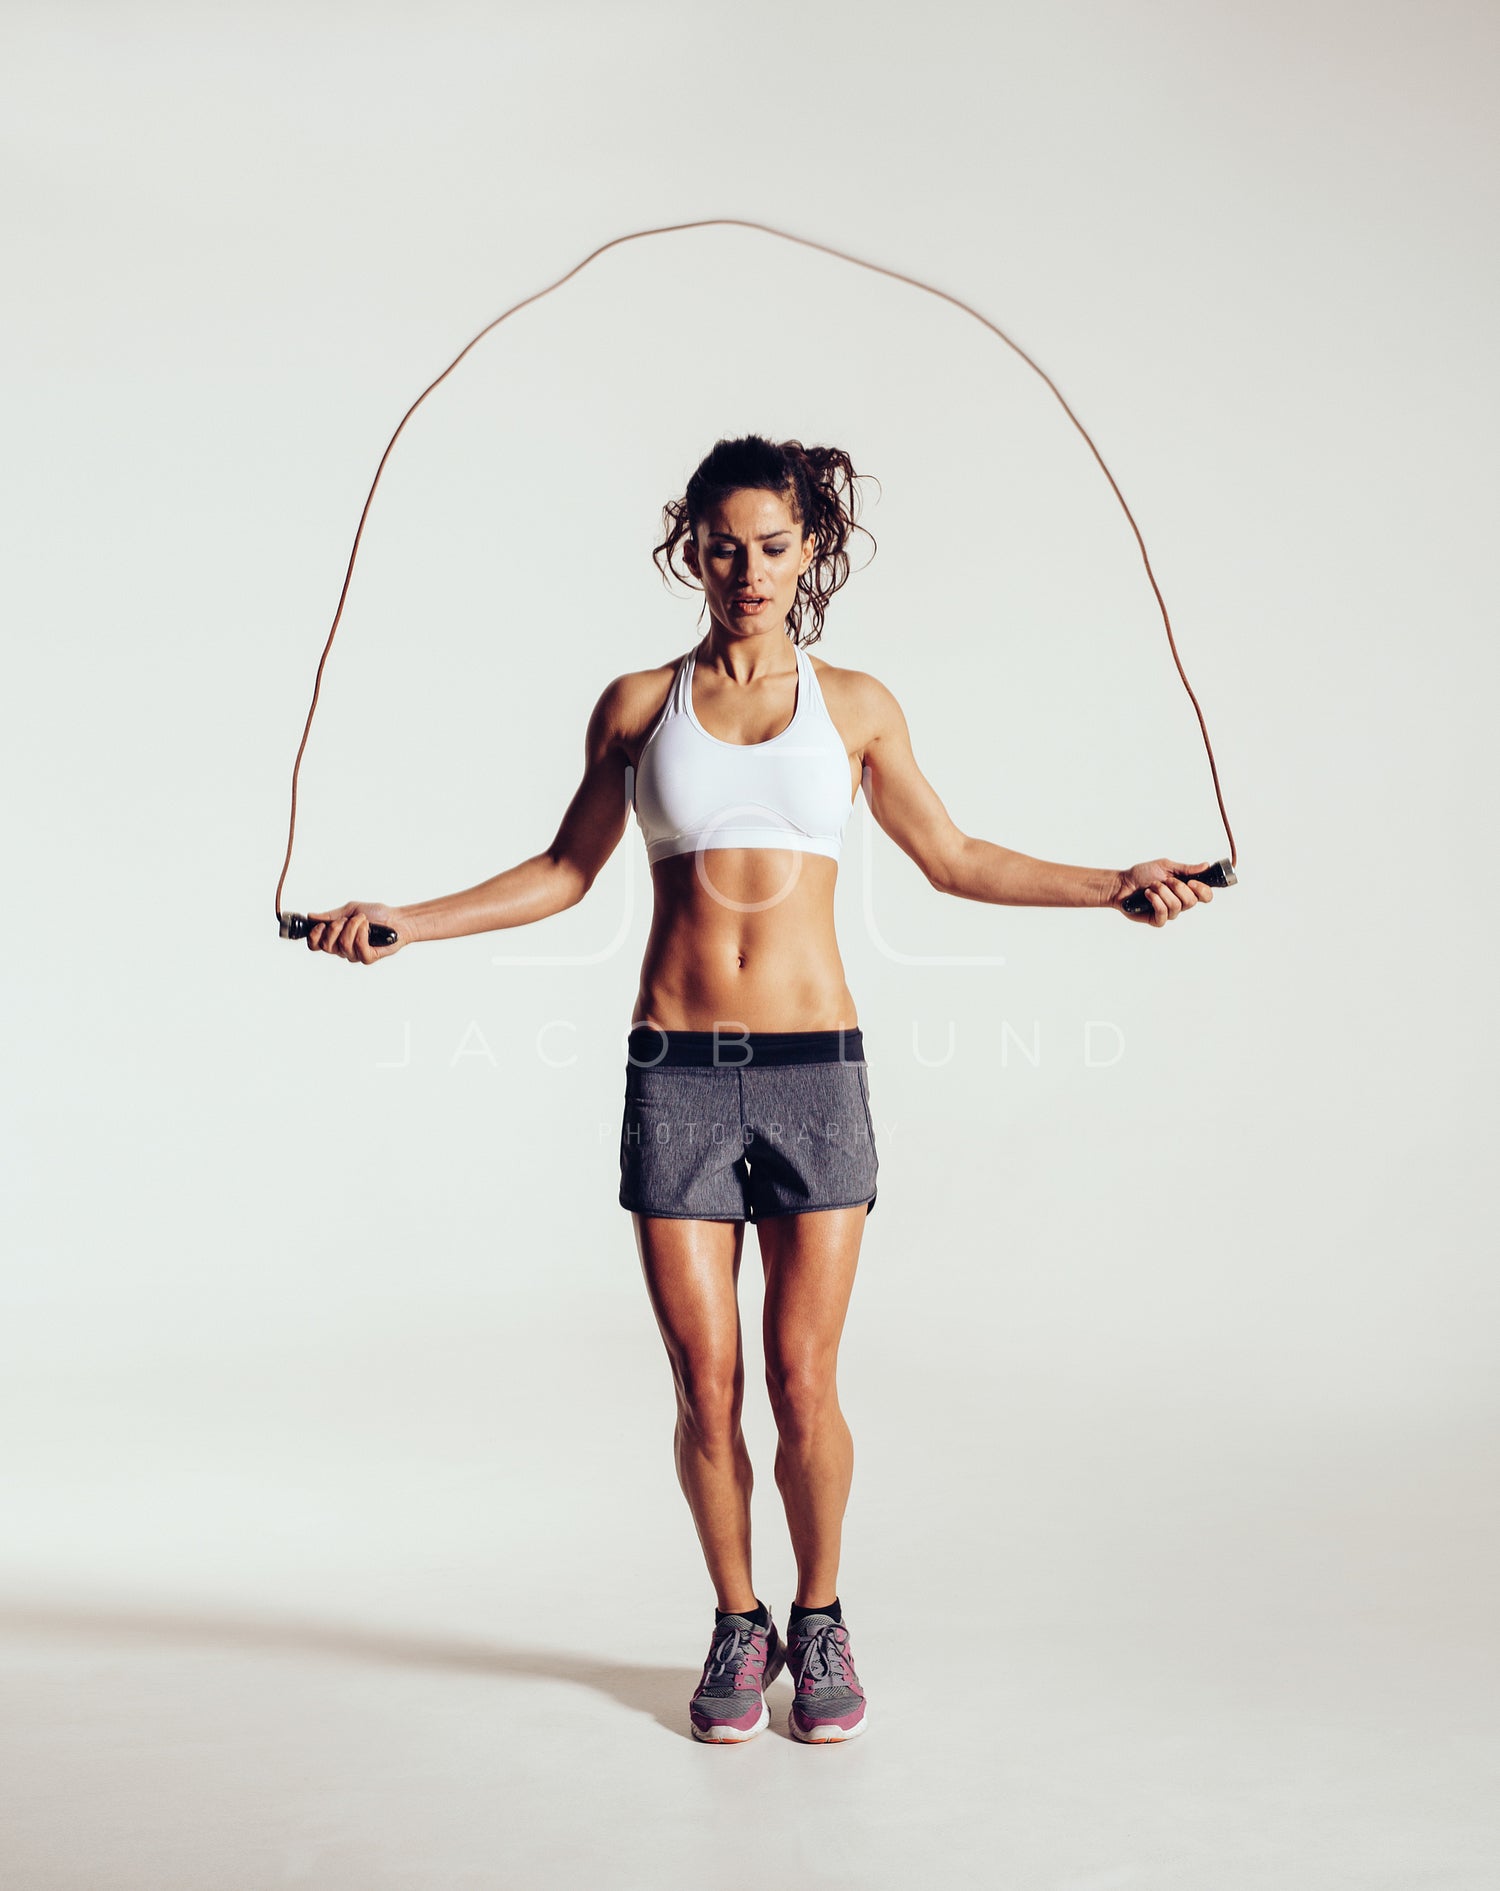 Female athlete in training clothes doing workout holding a skipping rope.  stock photo